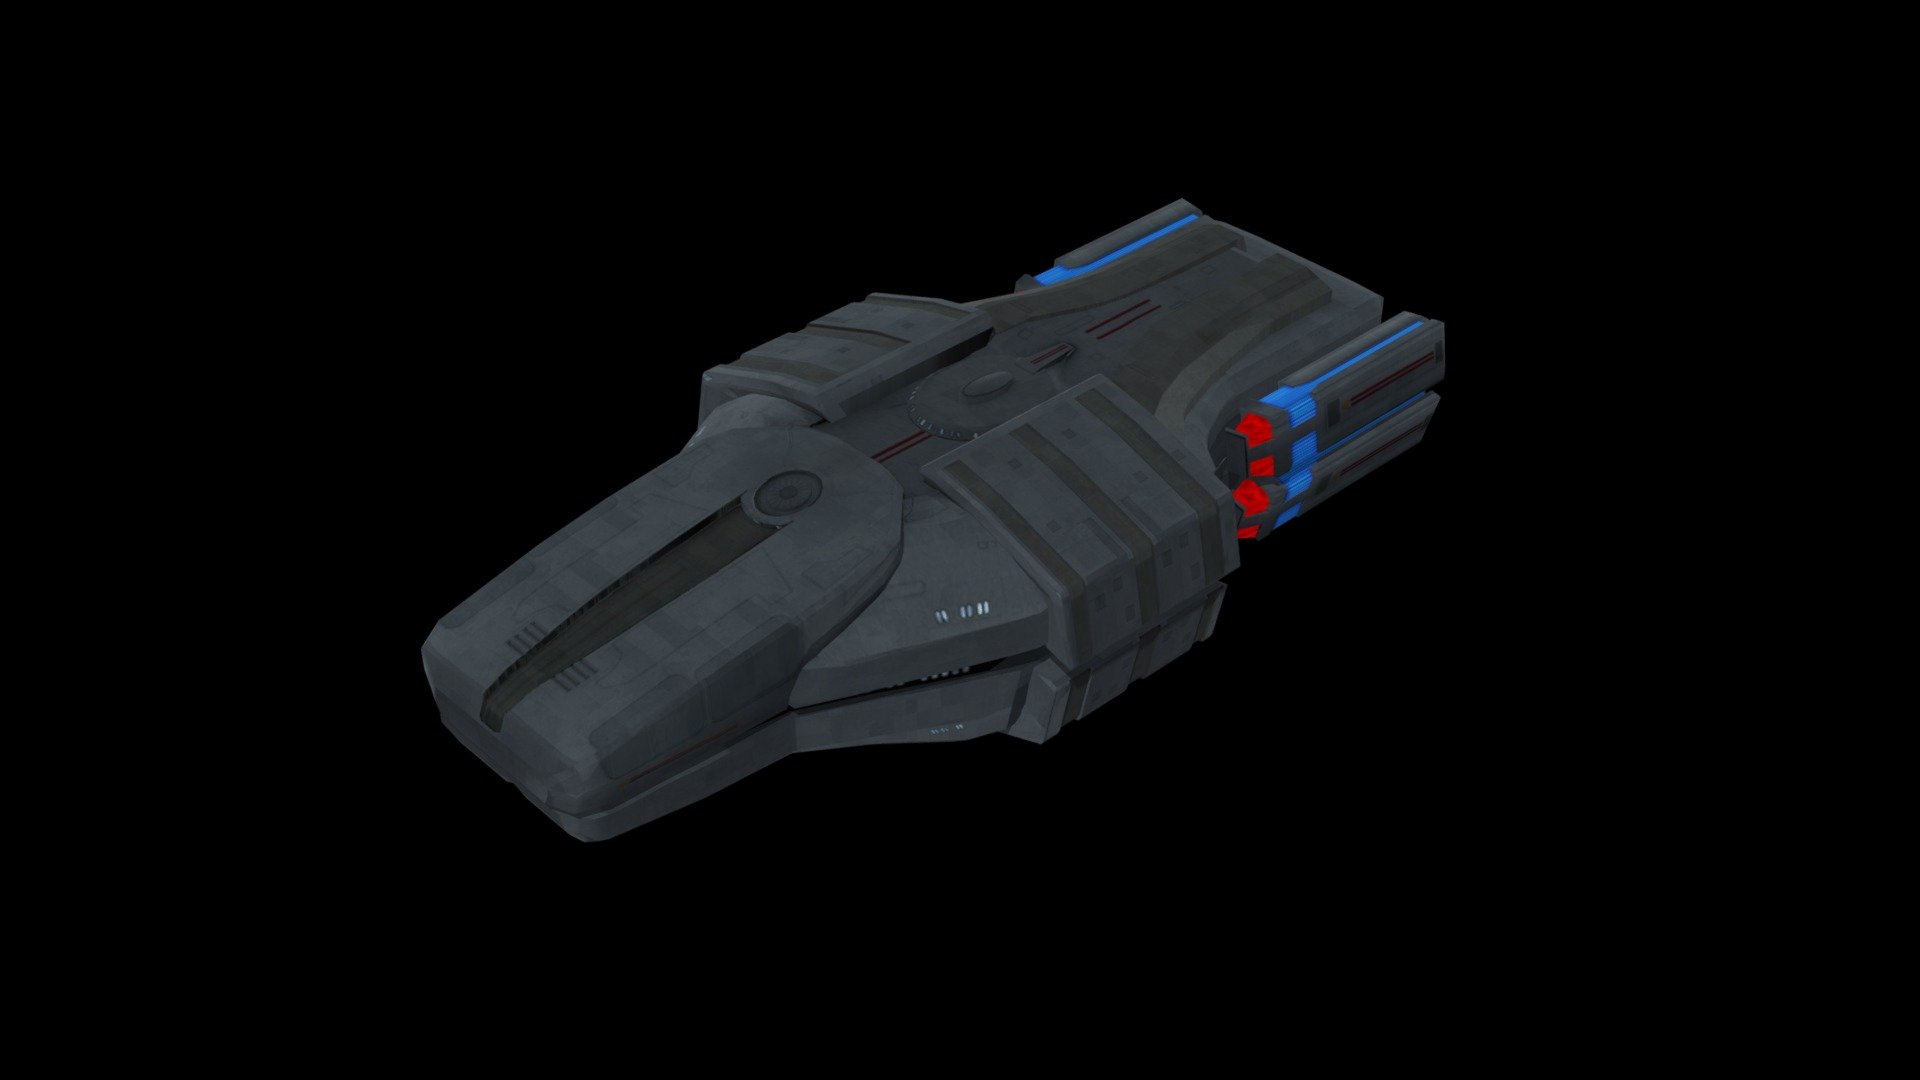 The very first ship I ever modeled. The U.S.S. Typhon is a ship that exists outside of the Star Trek cannon and was featured in a Star Trek game called Invasion. This ship was commanded by Worf during a Dominion War side story for the game. It carries 26 Valkyrie-class fighters and was quite formiddable. This model was also made in Blender 2.8. It took a better part of 3 days to make 3d model